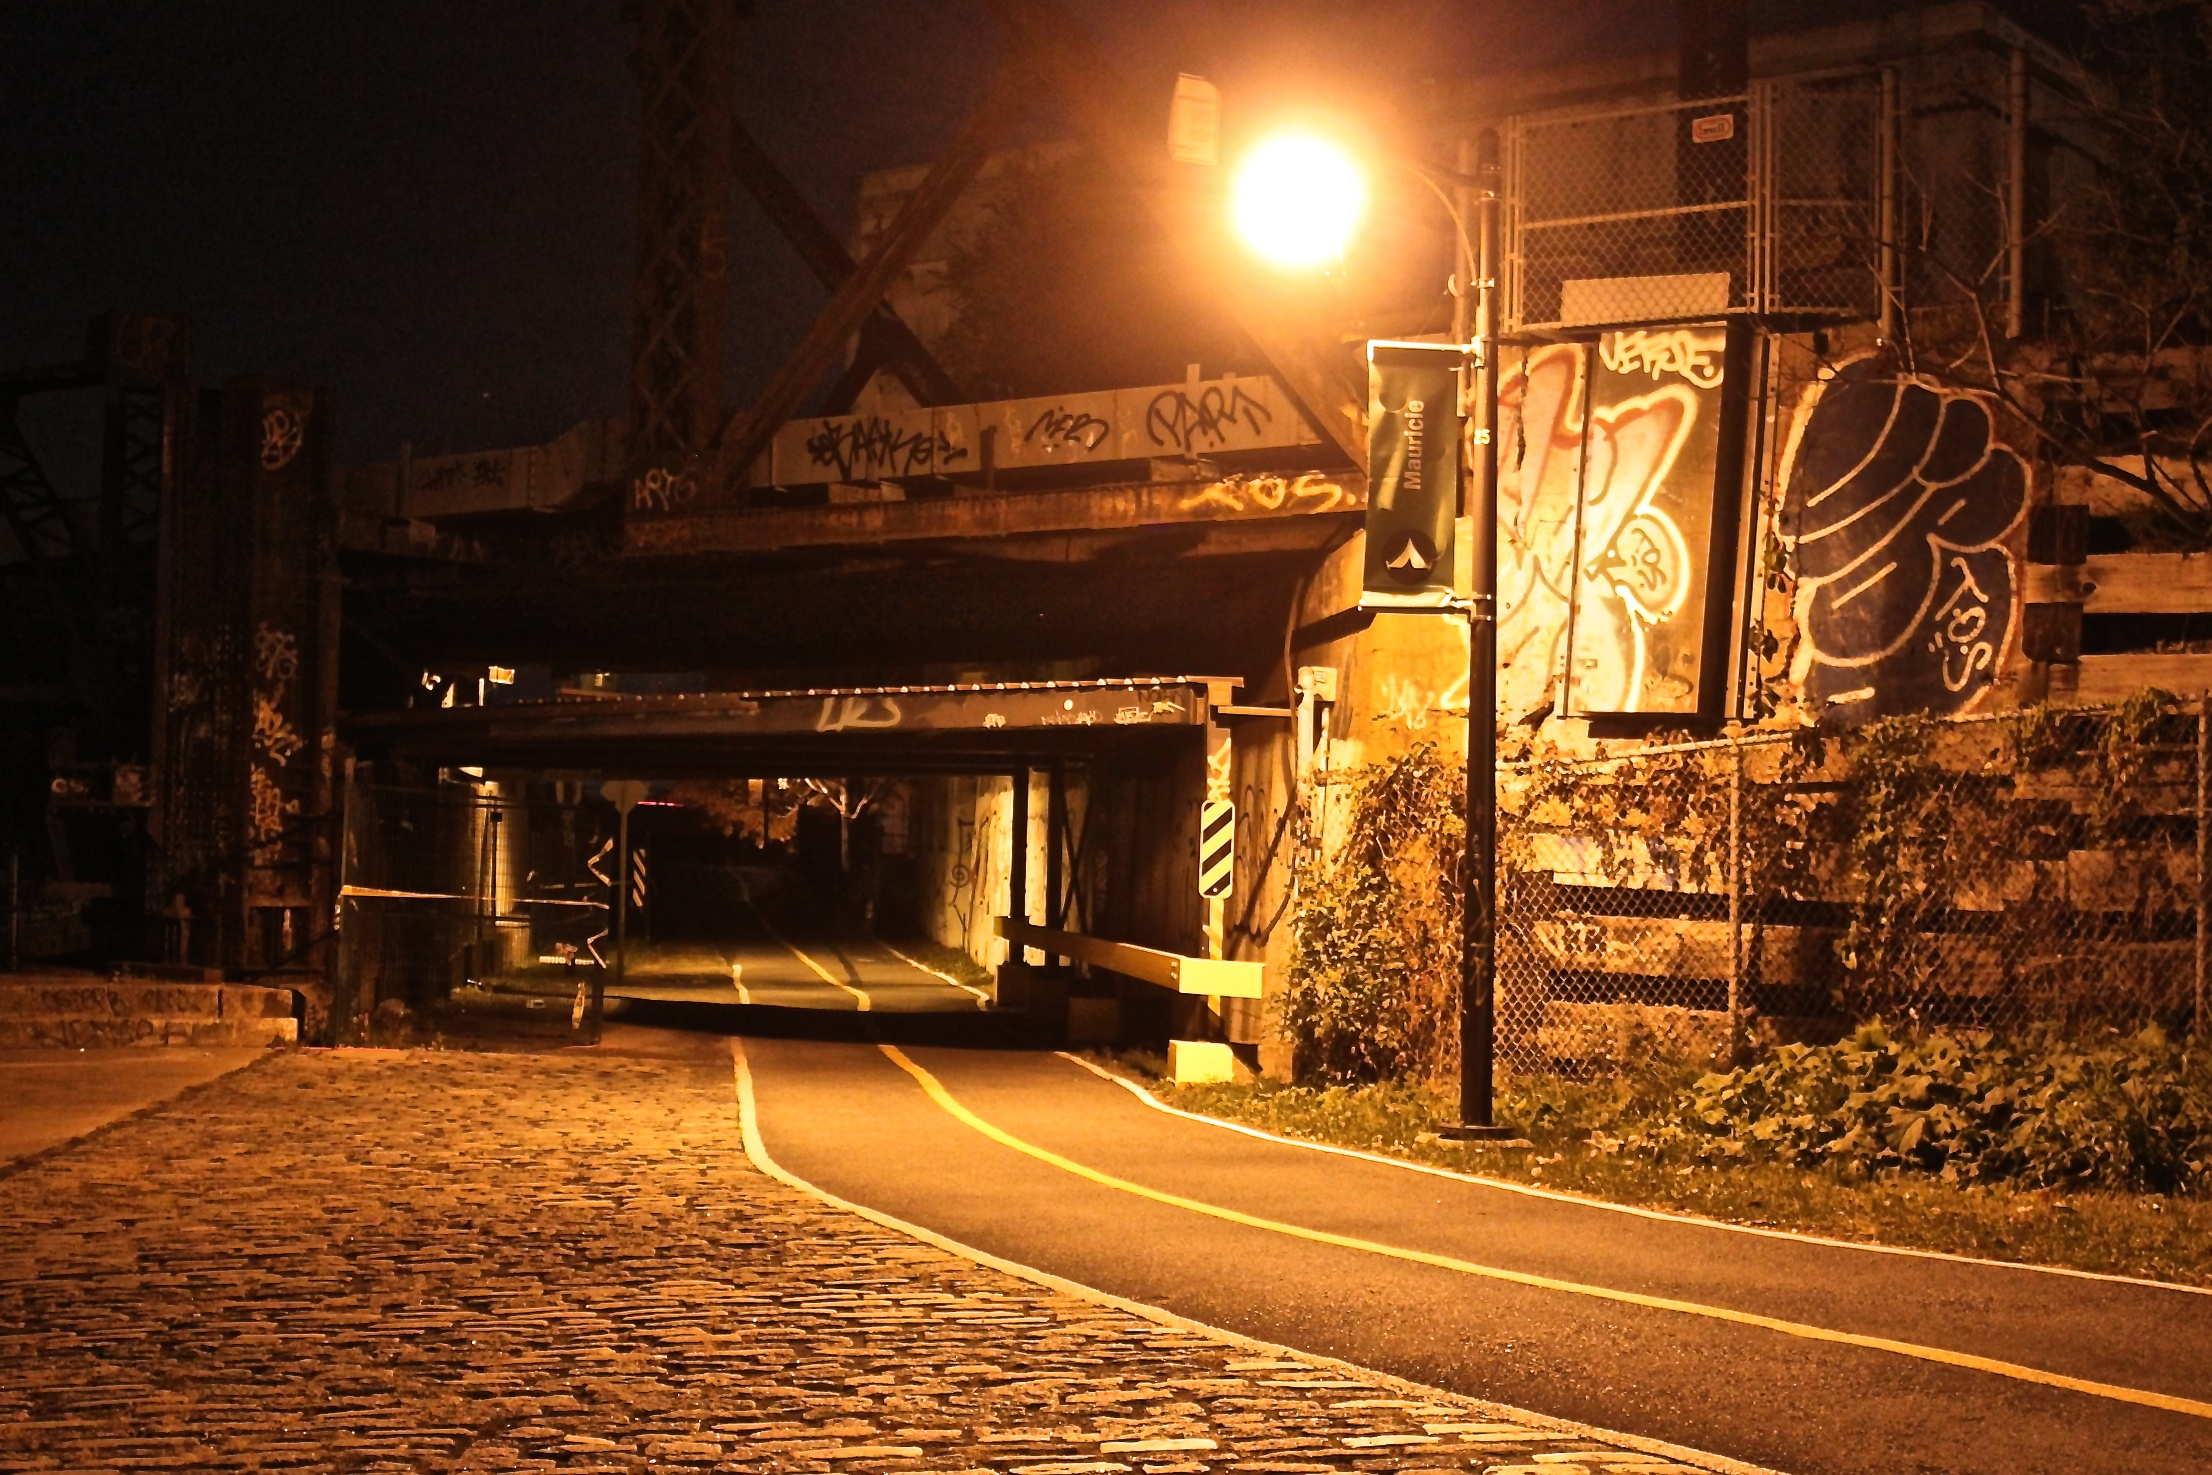 The Lachine Canal walkway, where many mysterious deaths have occurred. Photo by Katerina Gang.